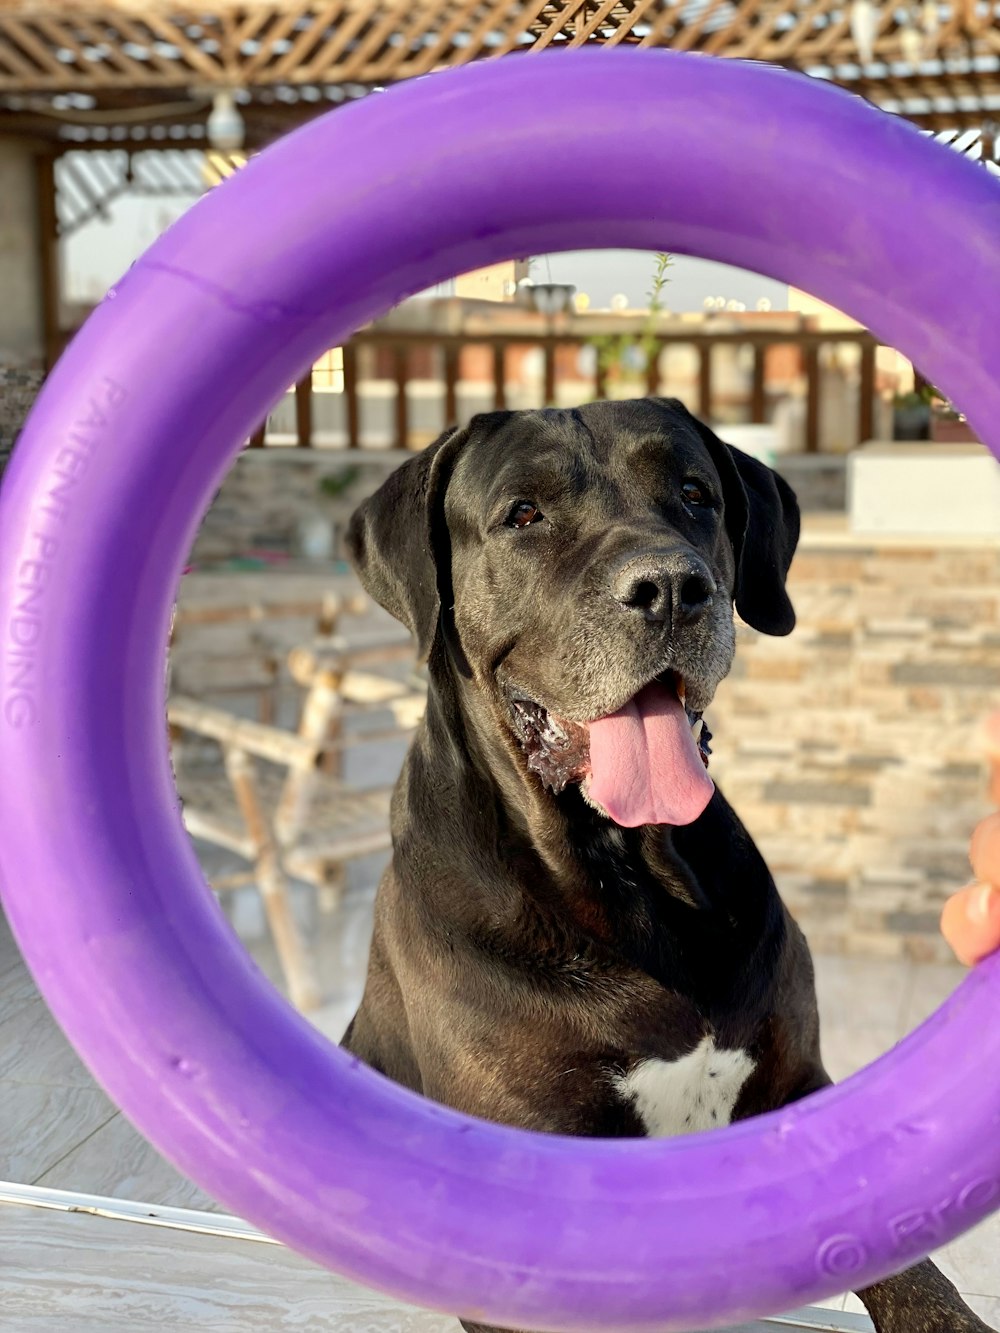 a large black dog with its tongue hanging out of a purple ring